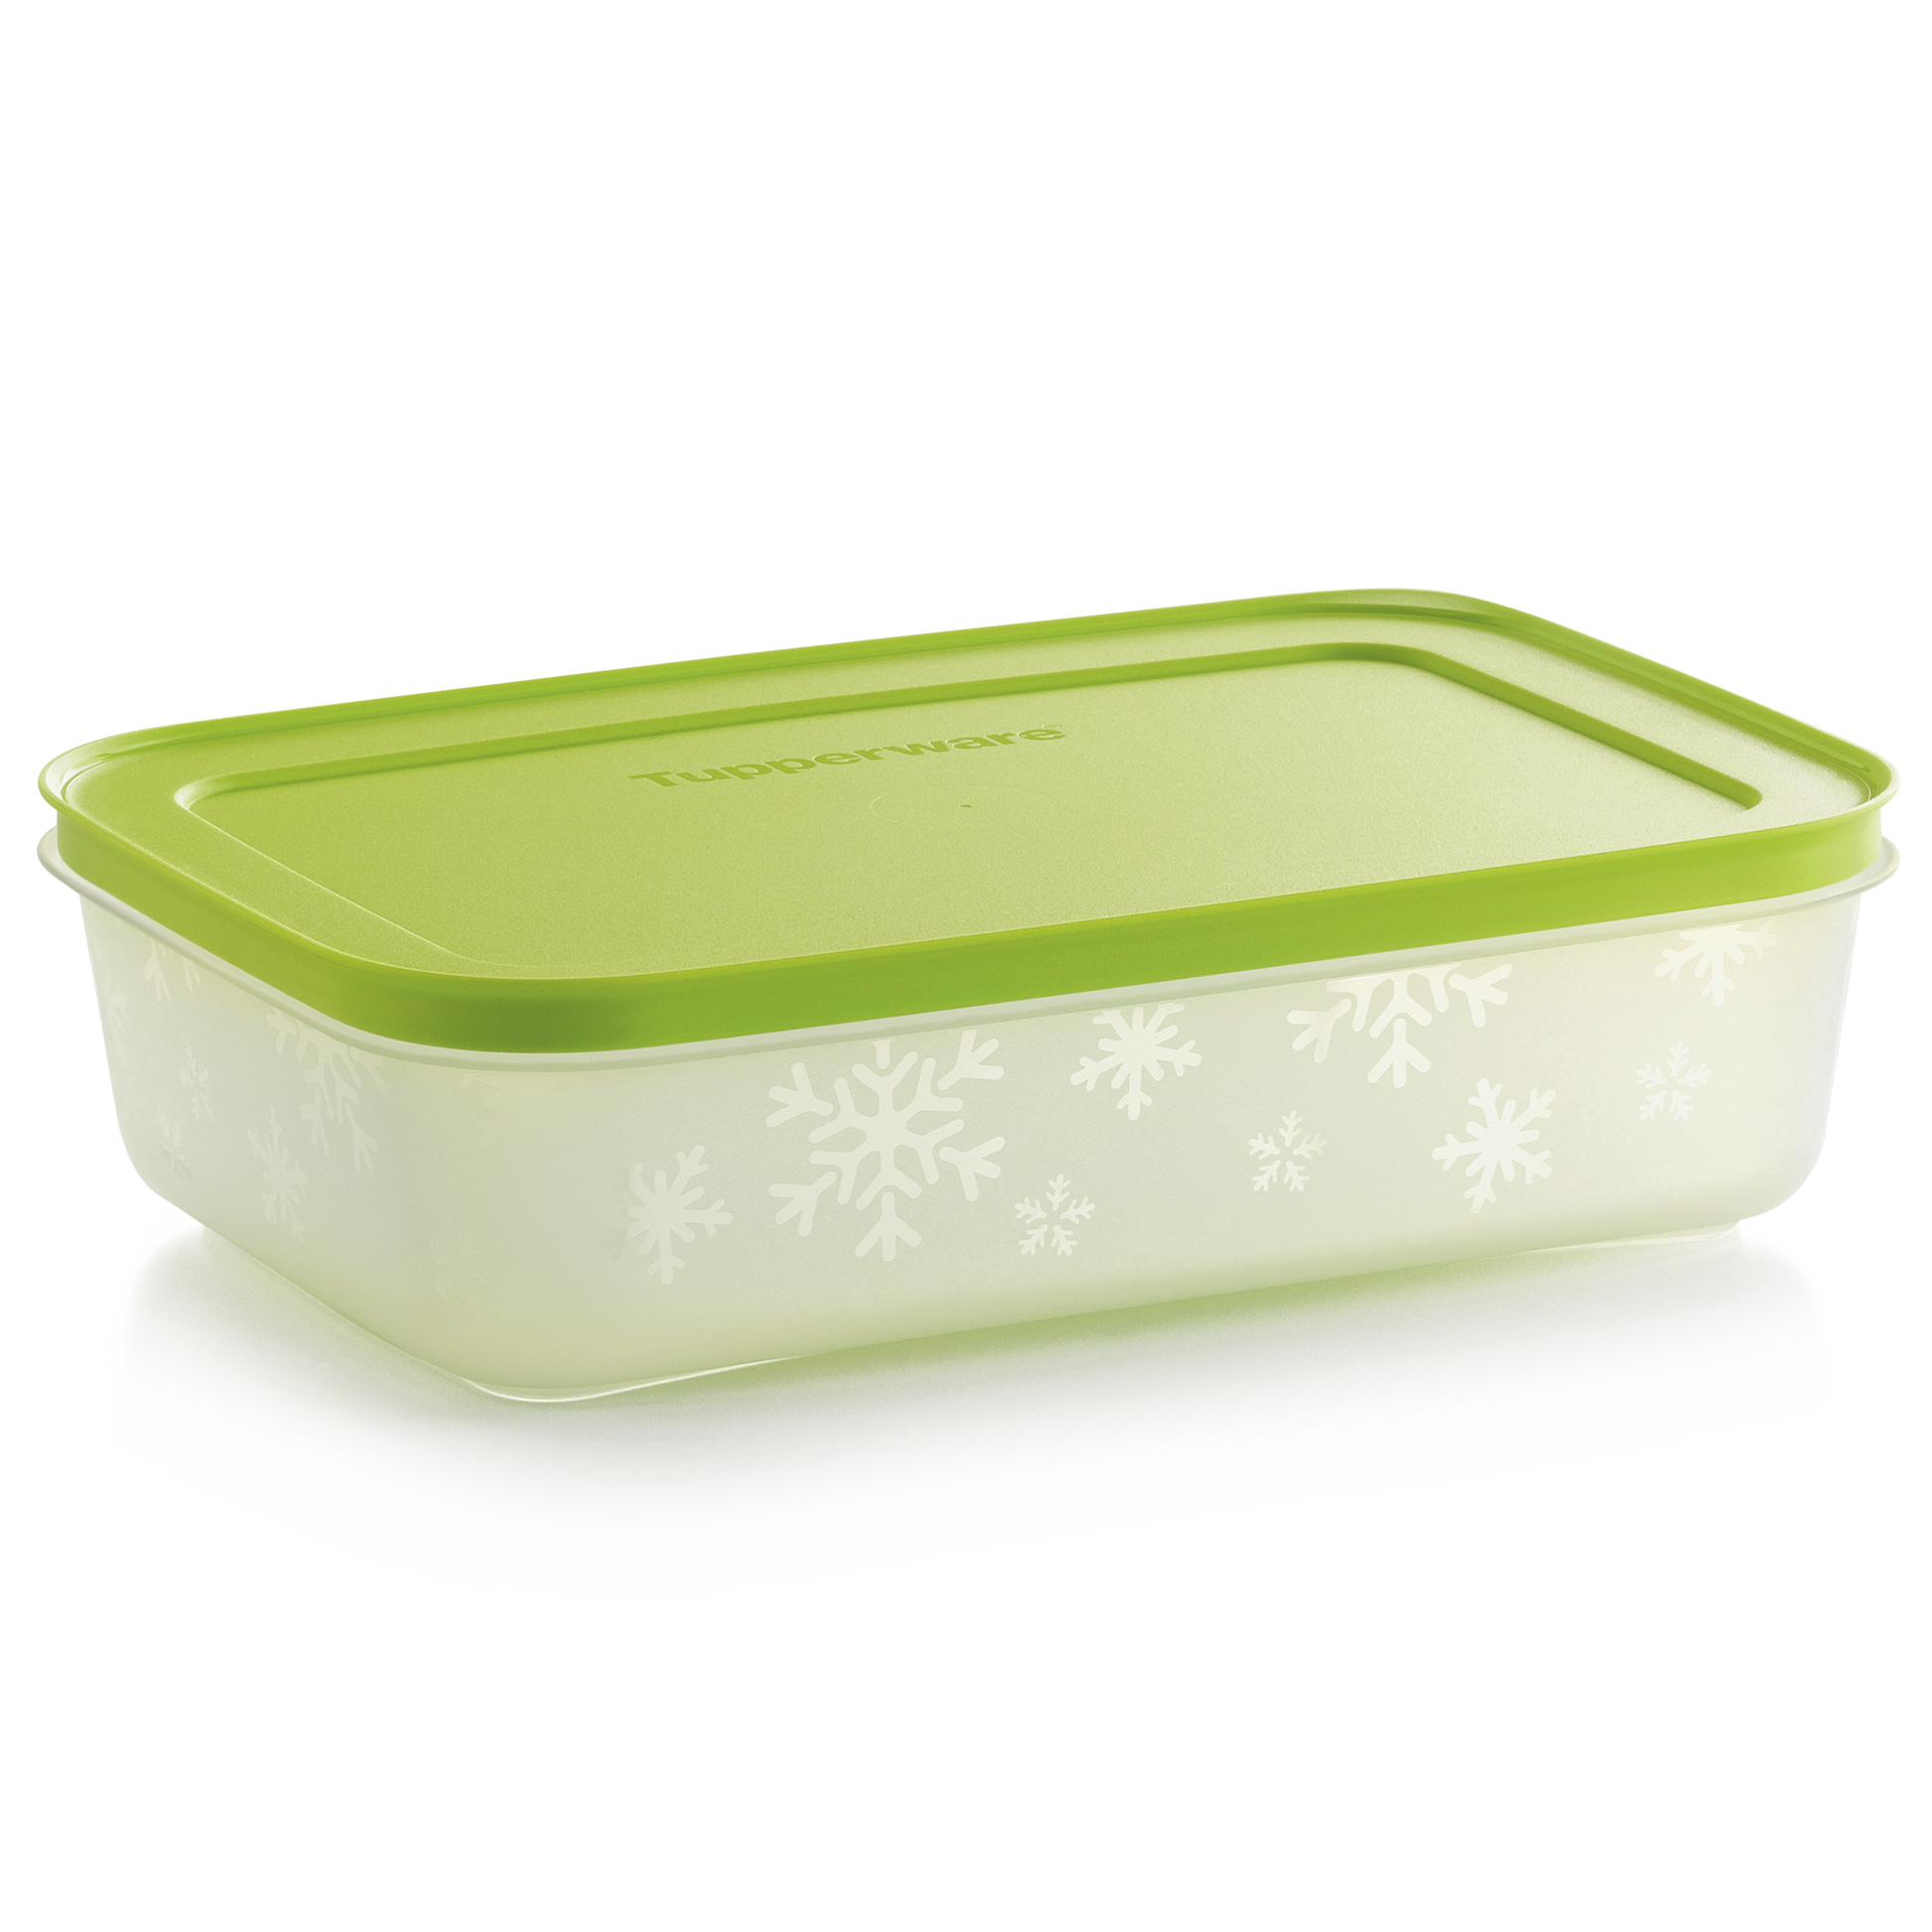 Tupperware Freezer mates Plus medium shallow with green top and snowflakes on outside of container